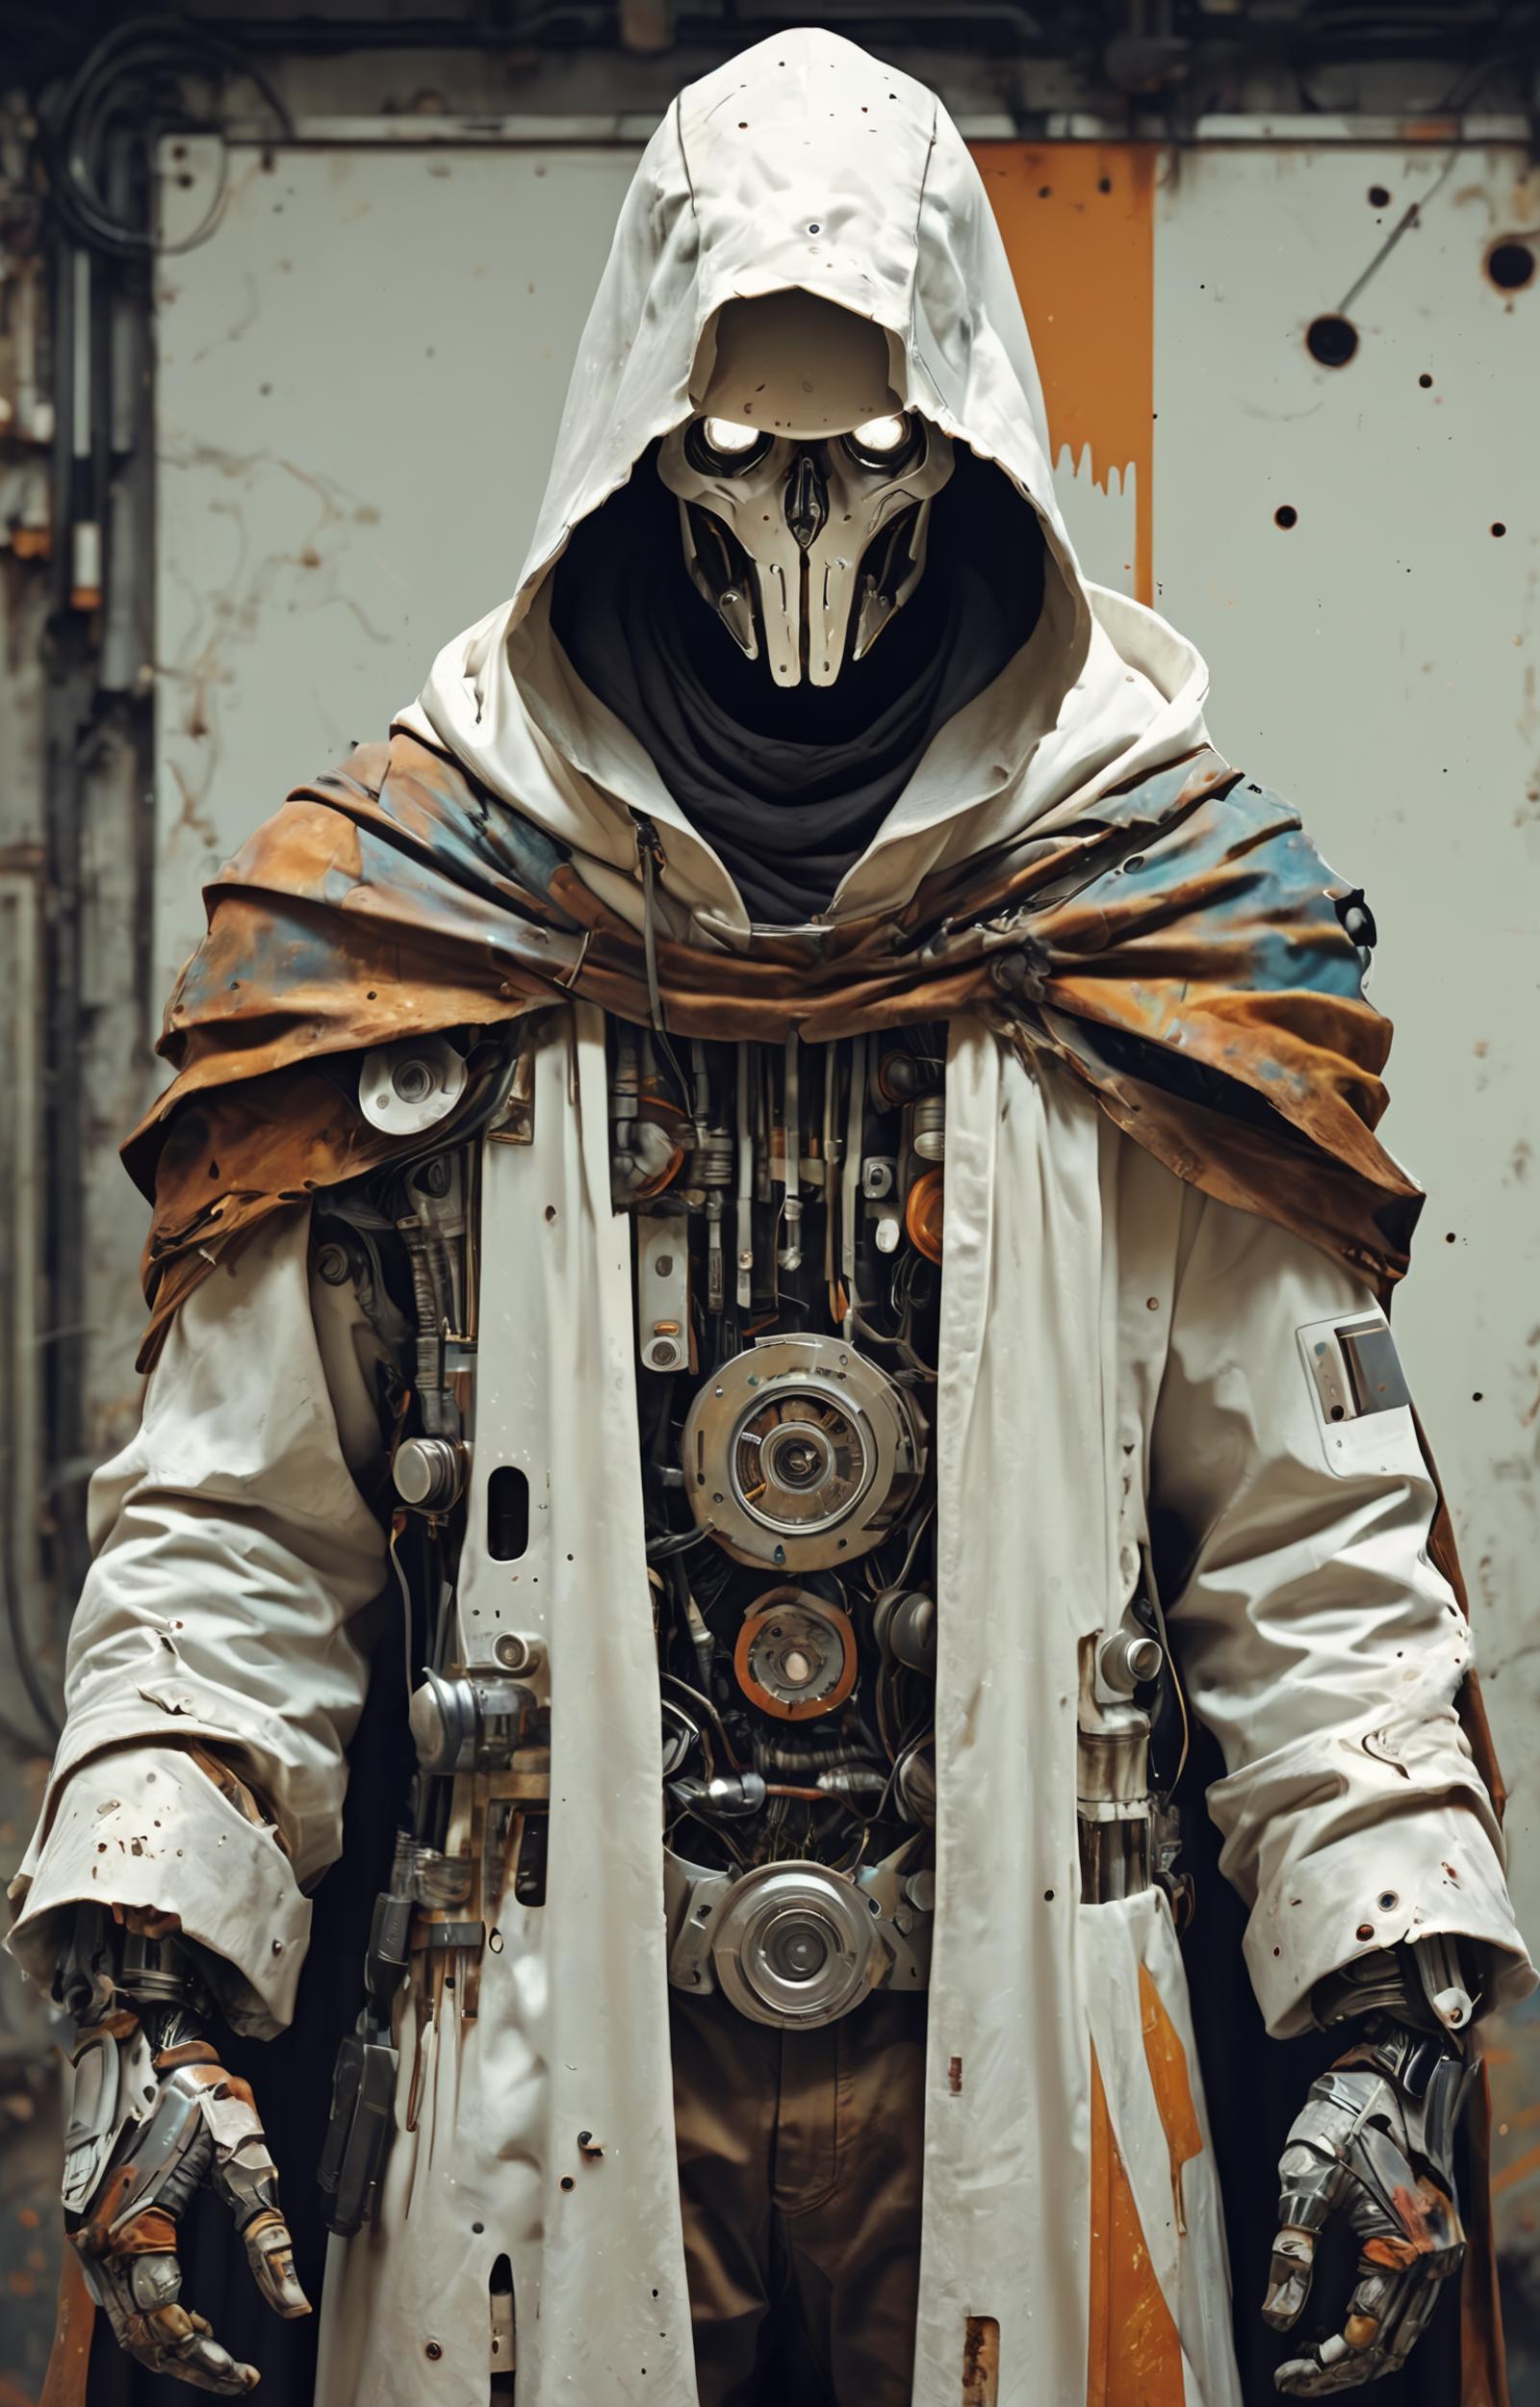 A person wearing a white robe with a hood and a mask over their face, surrounded by machinery and gears.